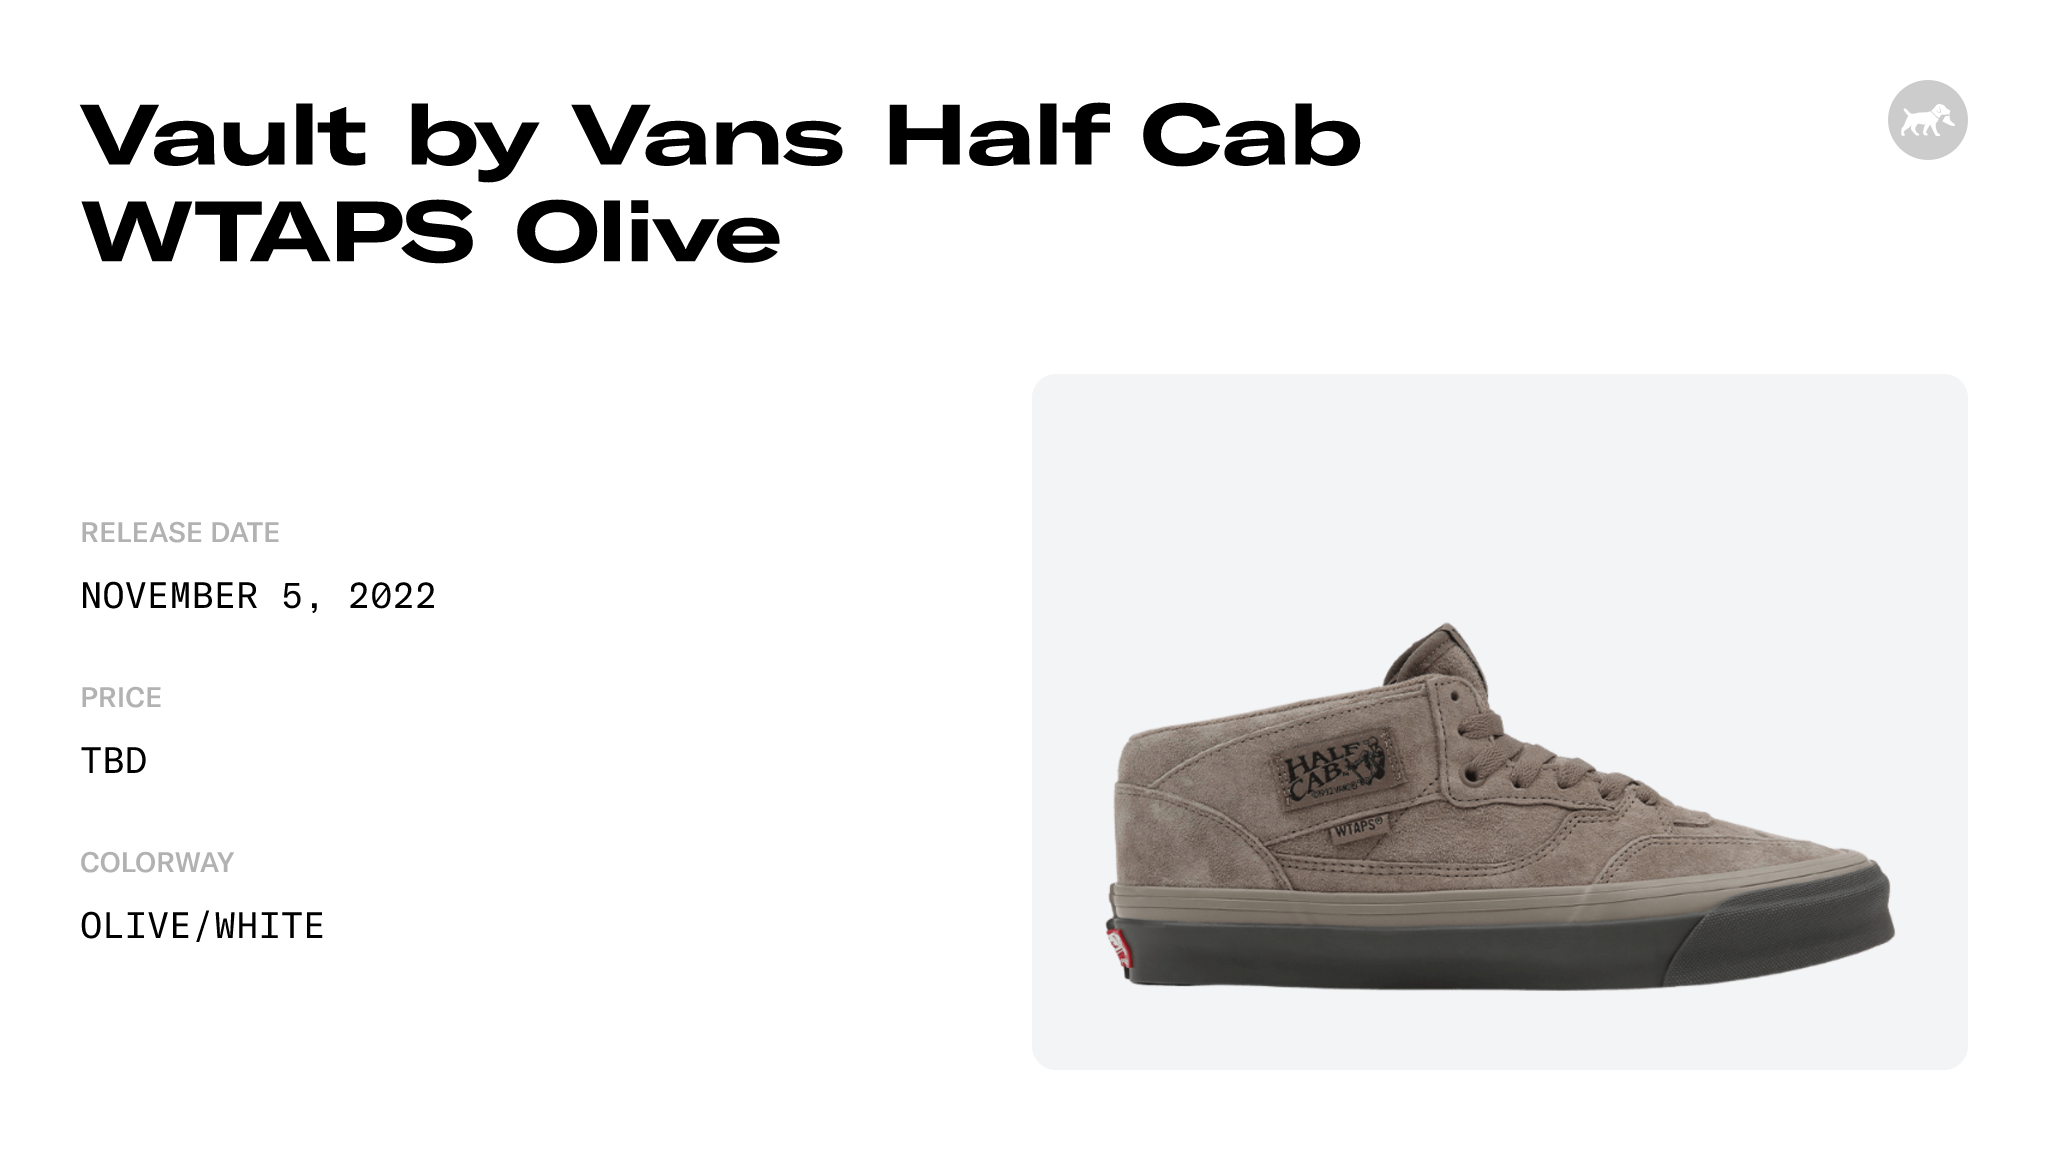 Vault by Vans Half Cab WTAPS Olive Raffles and Release Date